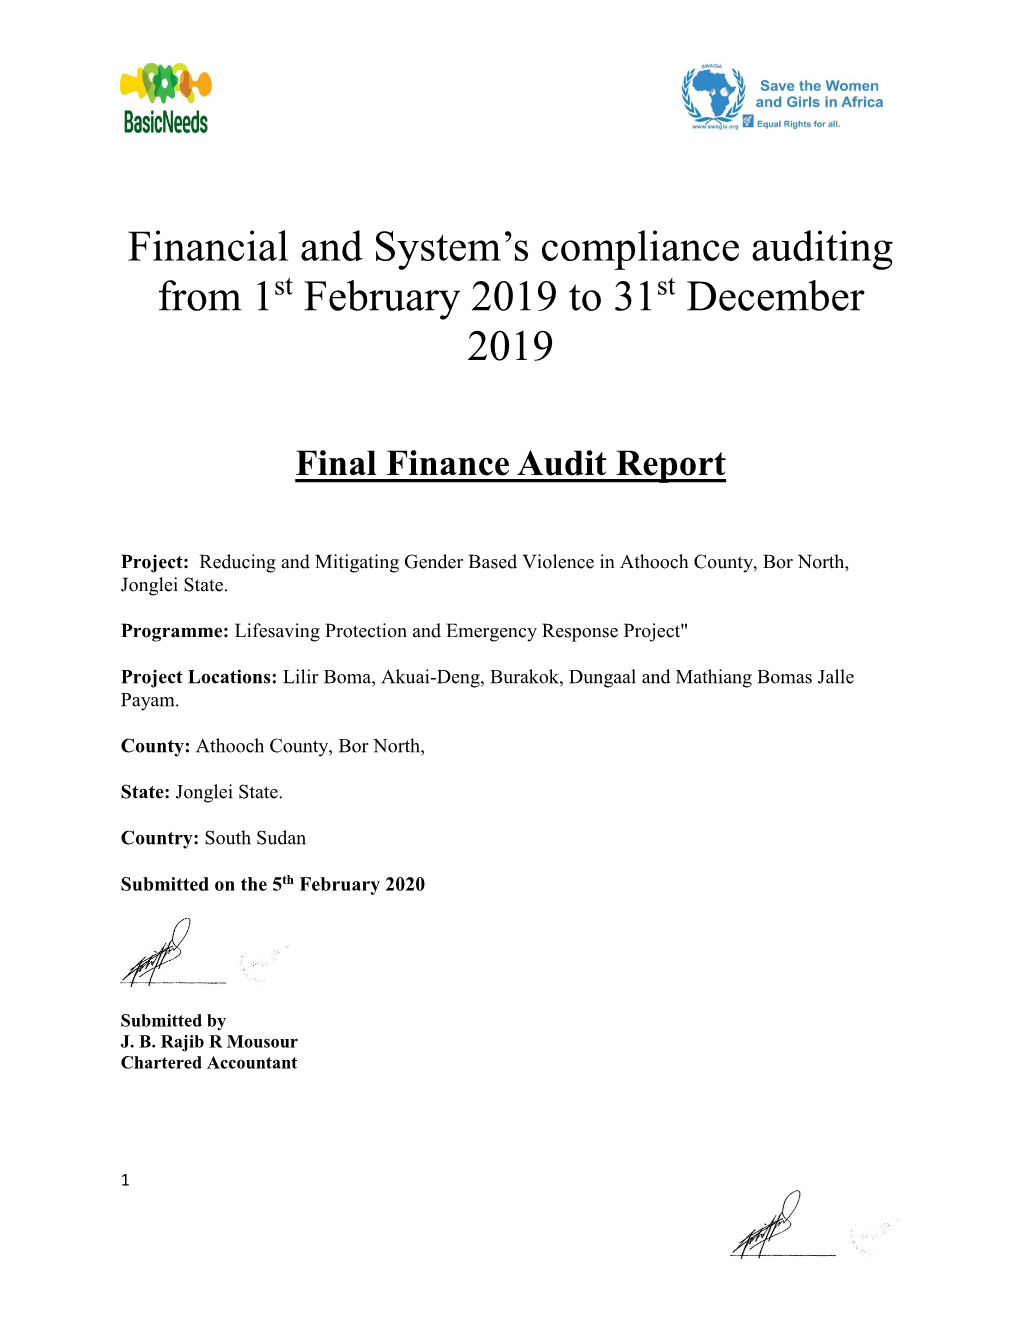 Financial and System's Compliance Auditing from 1St February 2019 To